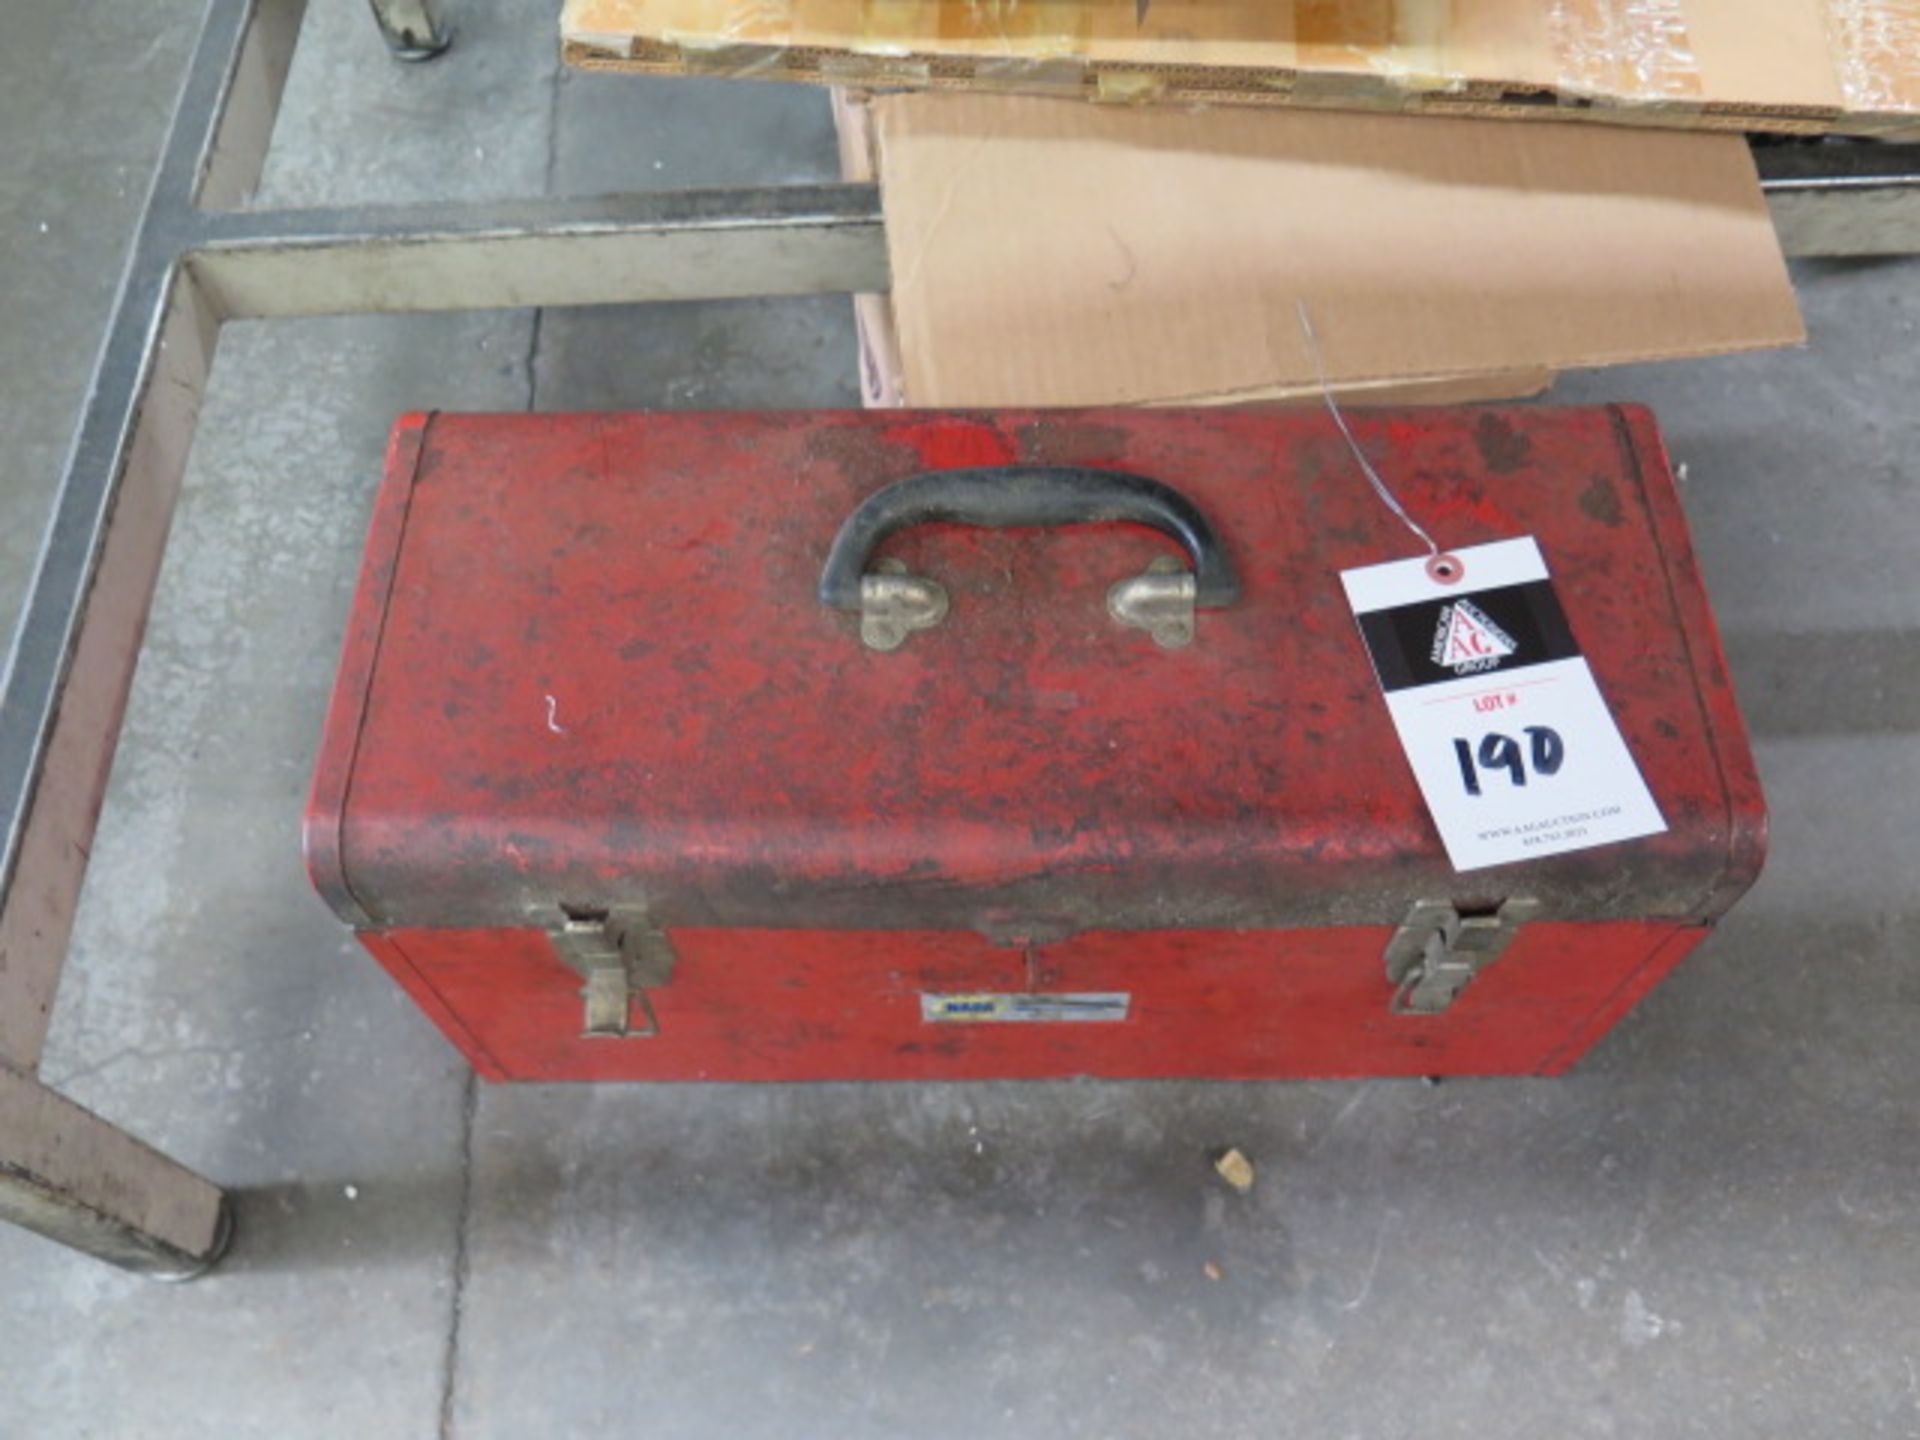 Tool Box and Shim Stock (SOLD AS-IS - NO WARRANTY)